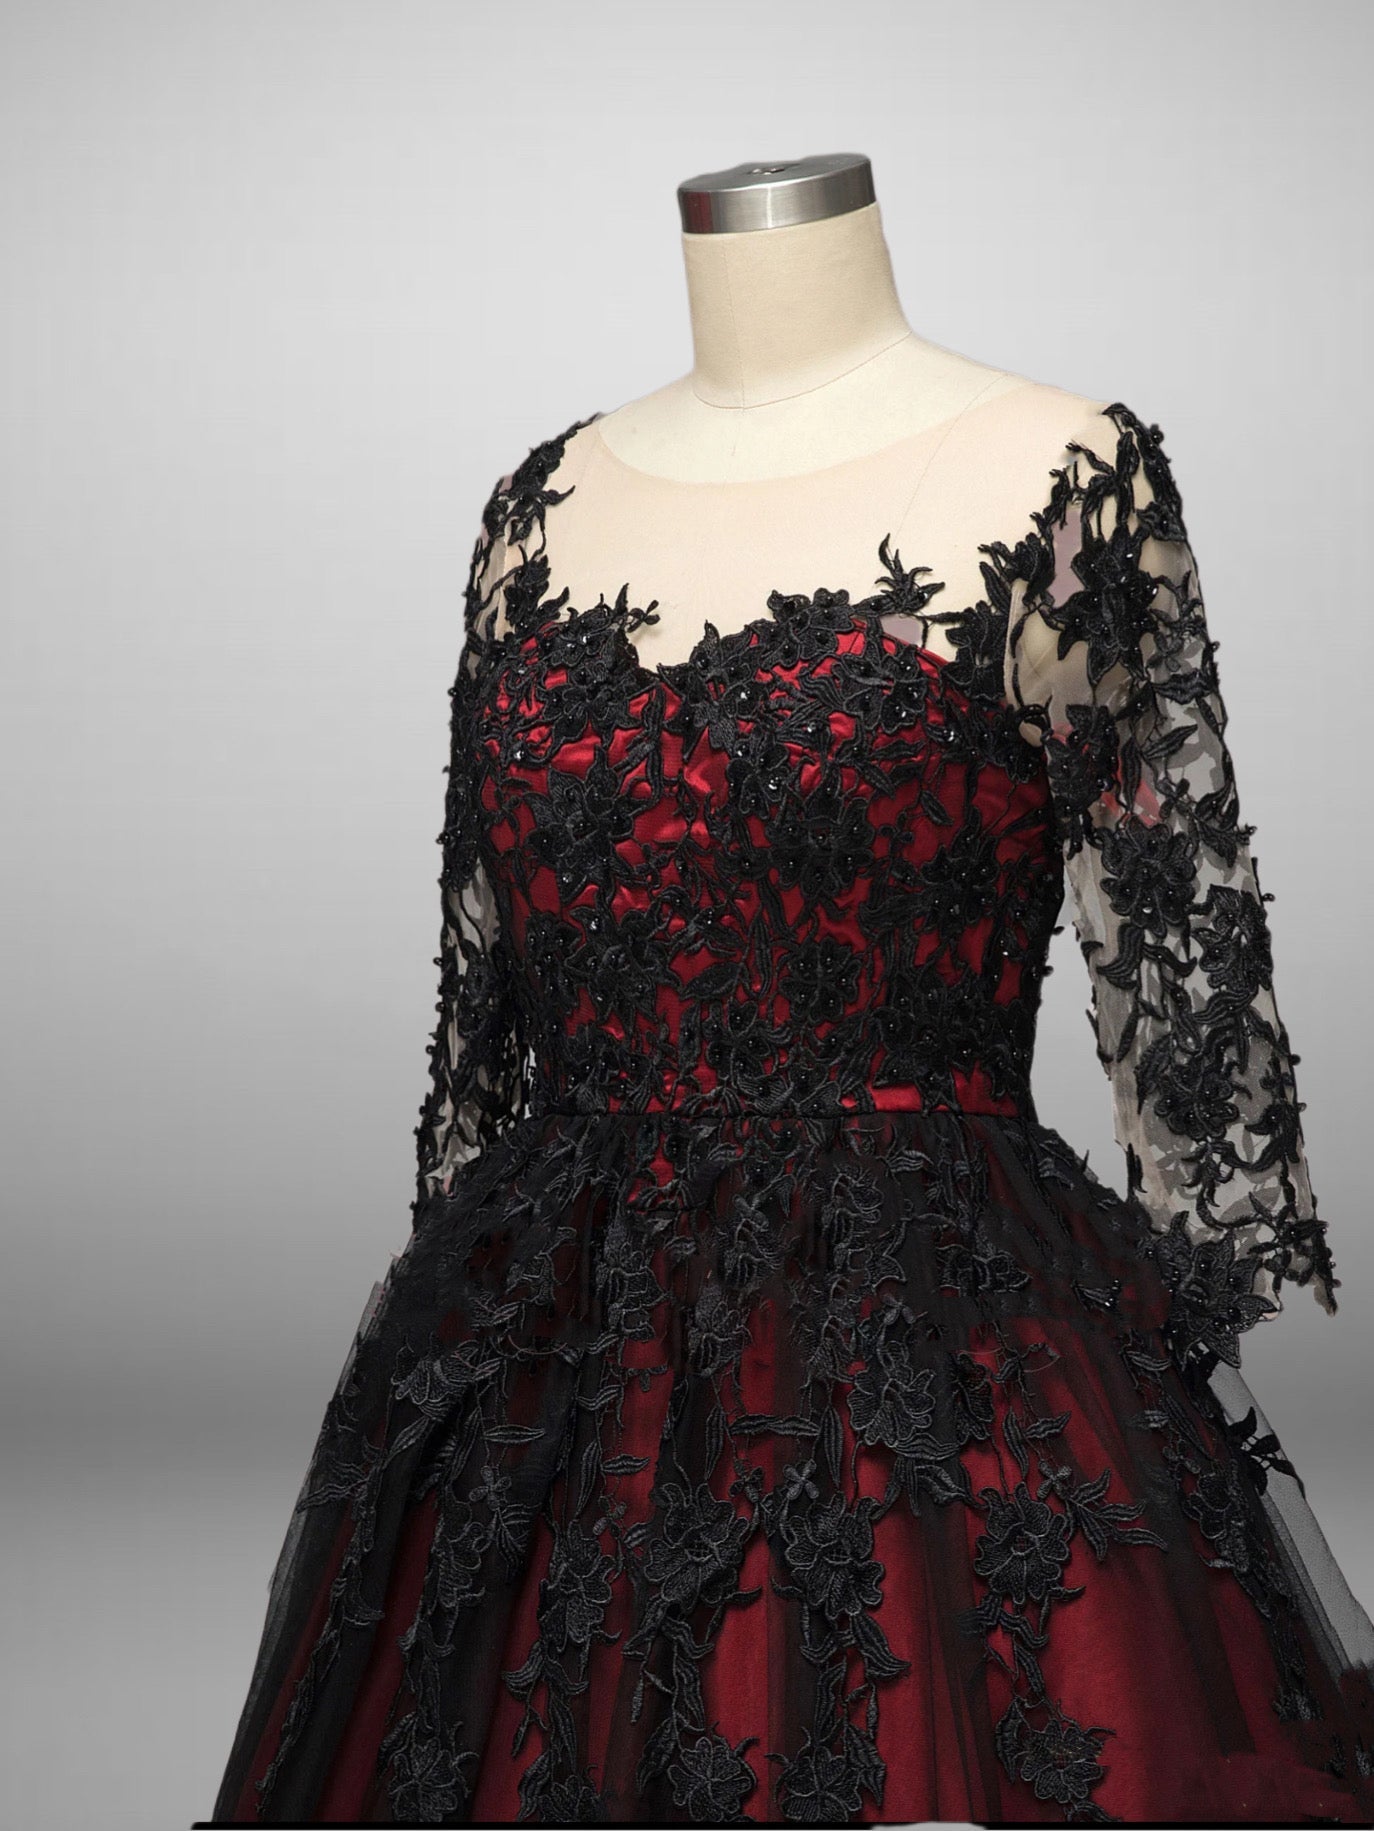 Gothic Black And Red A-Line Wedding Dress with Red Lace Floral Embroidered Plus Size - WonderlandByLilian